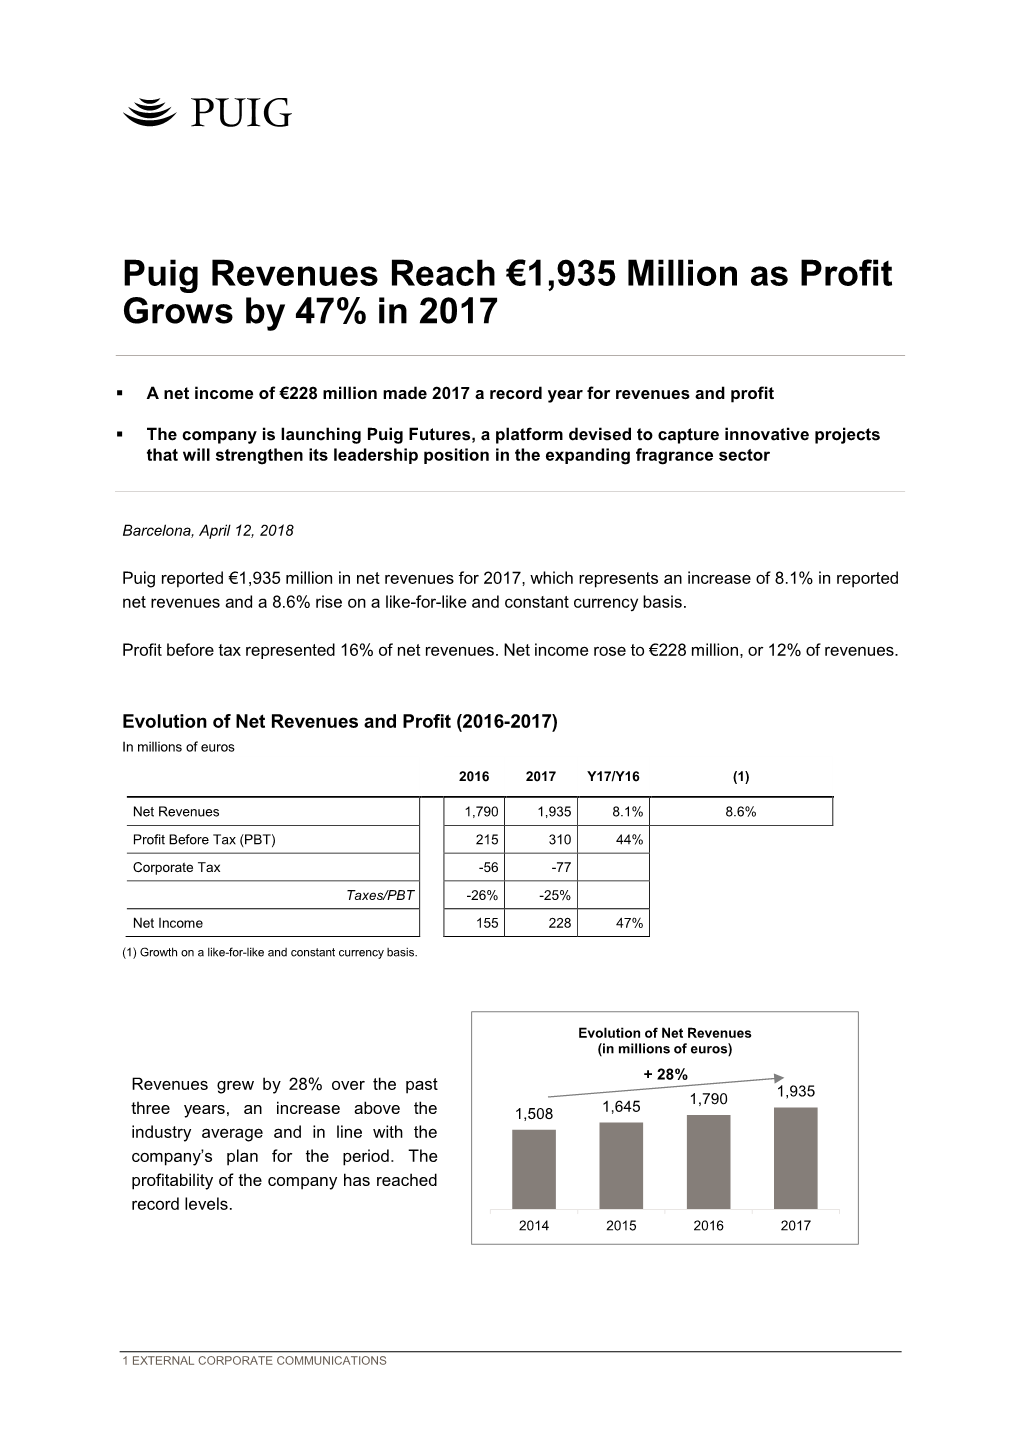 Puig Revenues Reach €1,935 Million As Profit Grows by 47% in 2017